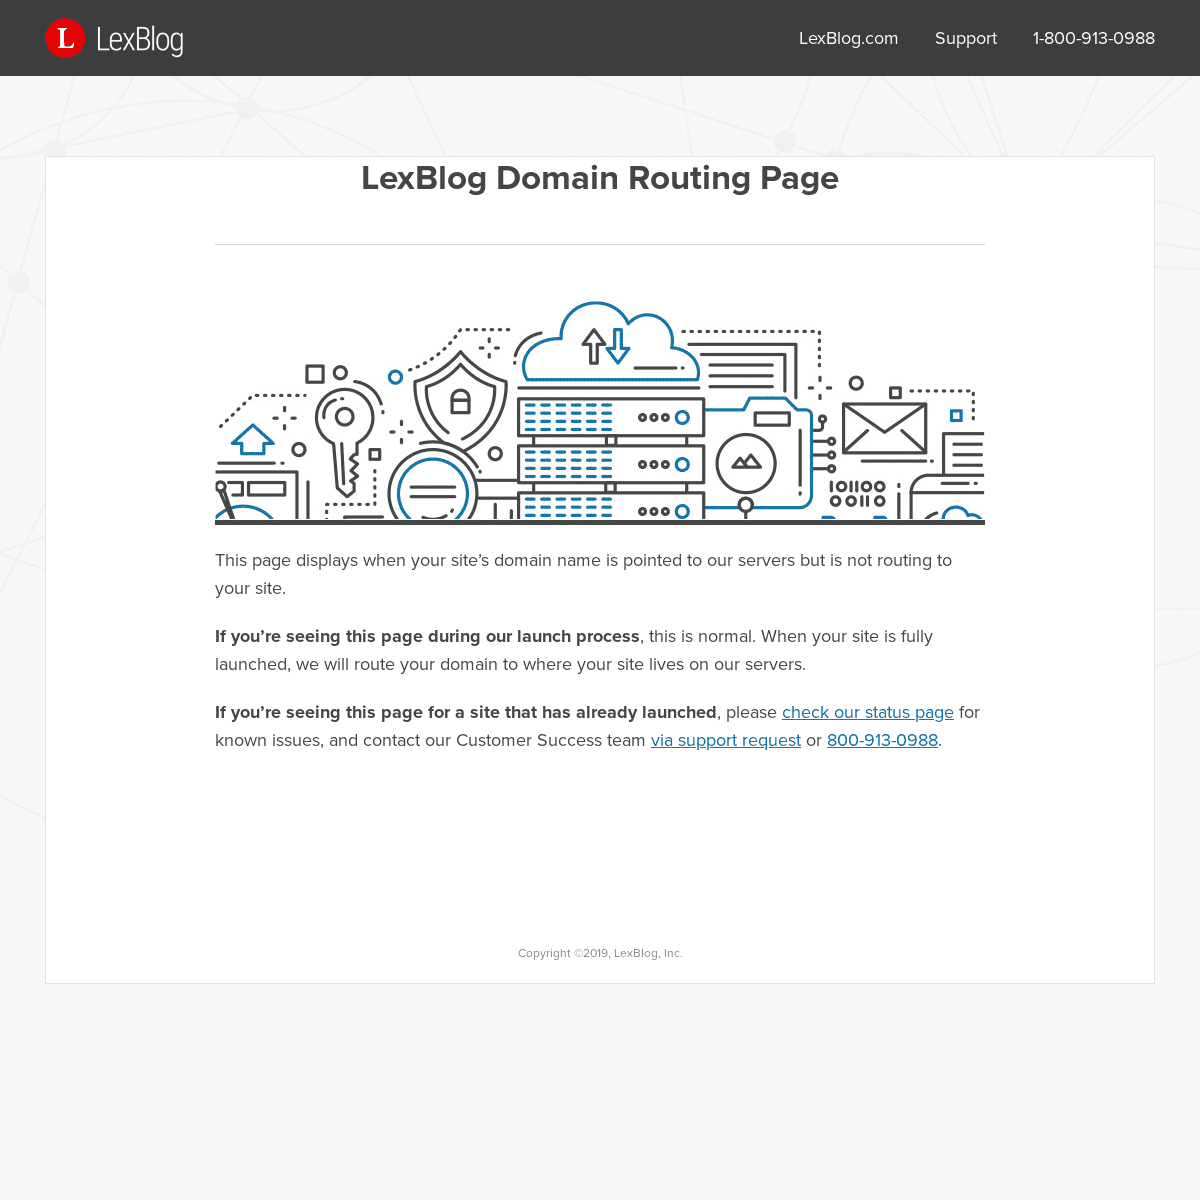 LexBlog Domain Routing Page | LexBlog Domain Routing Page |